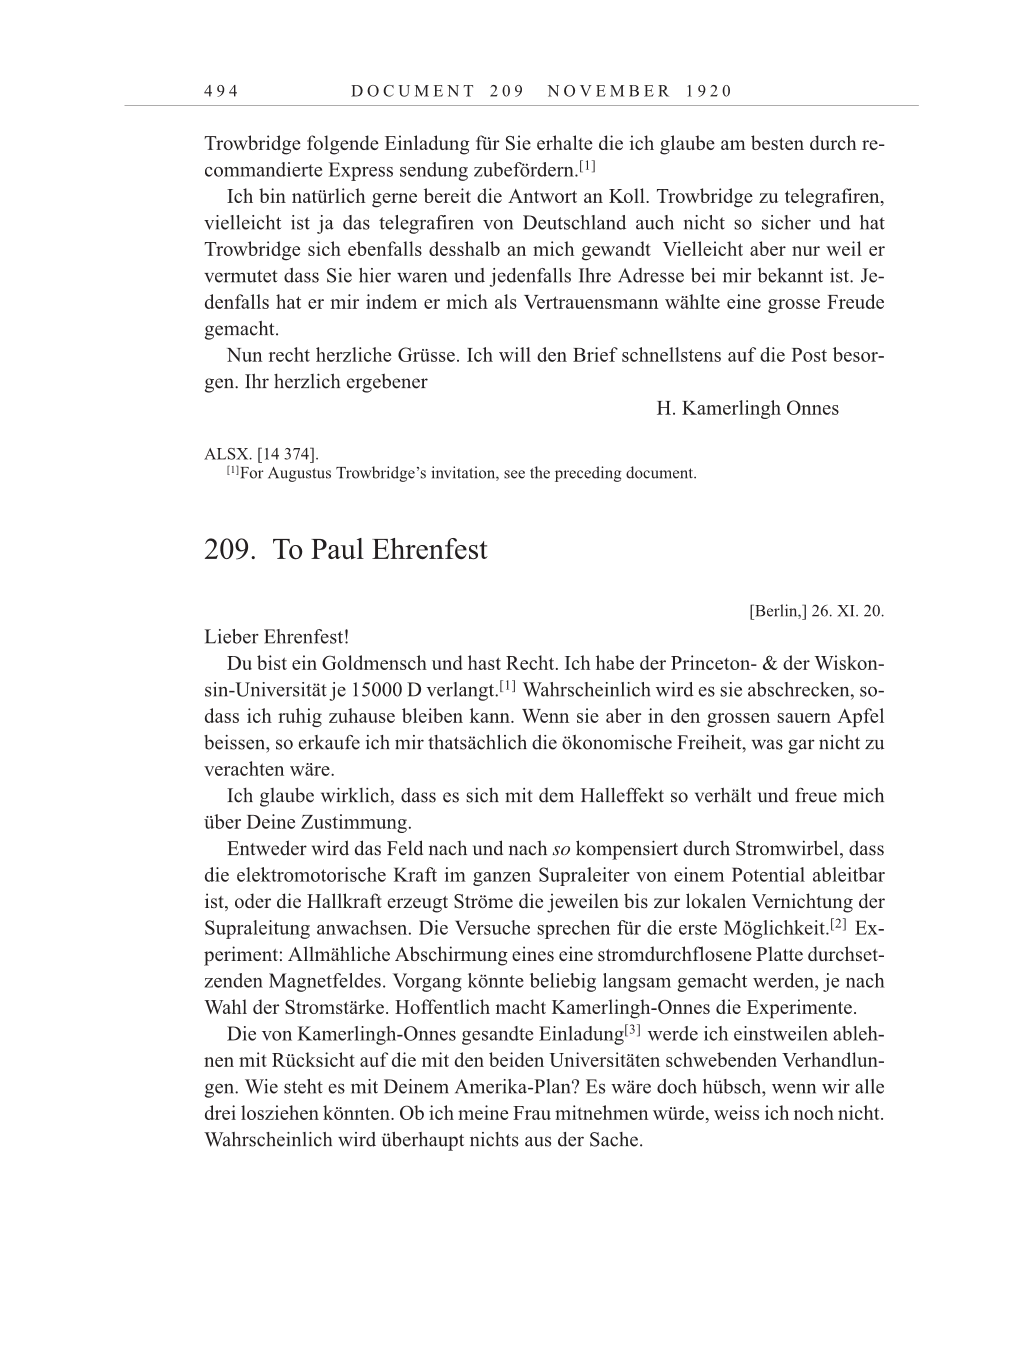 Volume 10: The Berlin Years: Correspondence May-December 1920 / Supplementary Correspondence 1909-1920 page 494